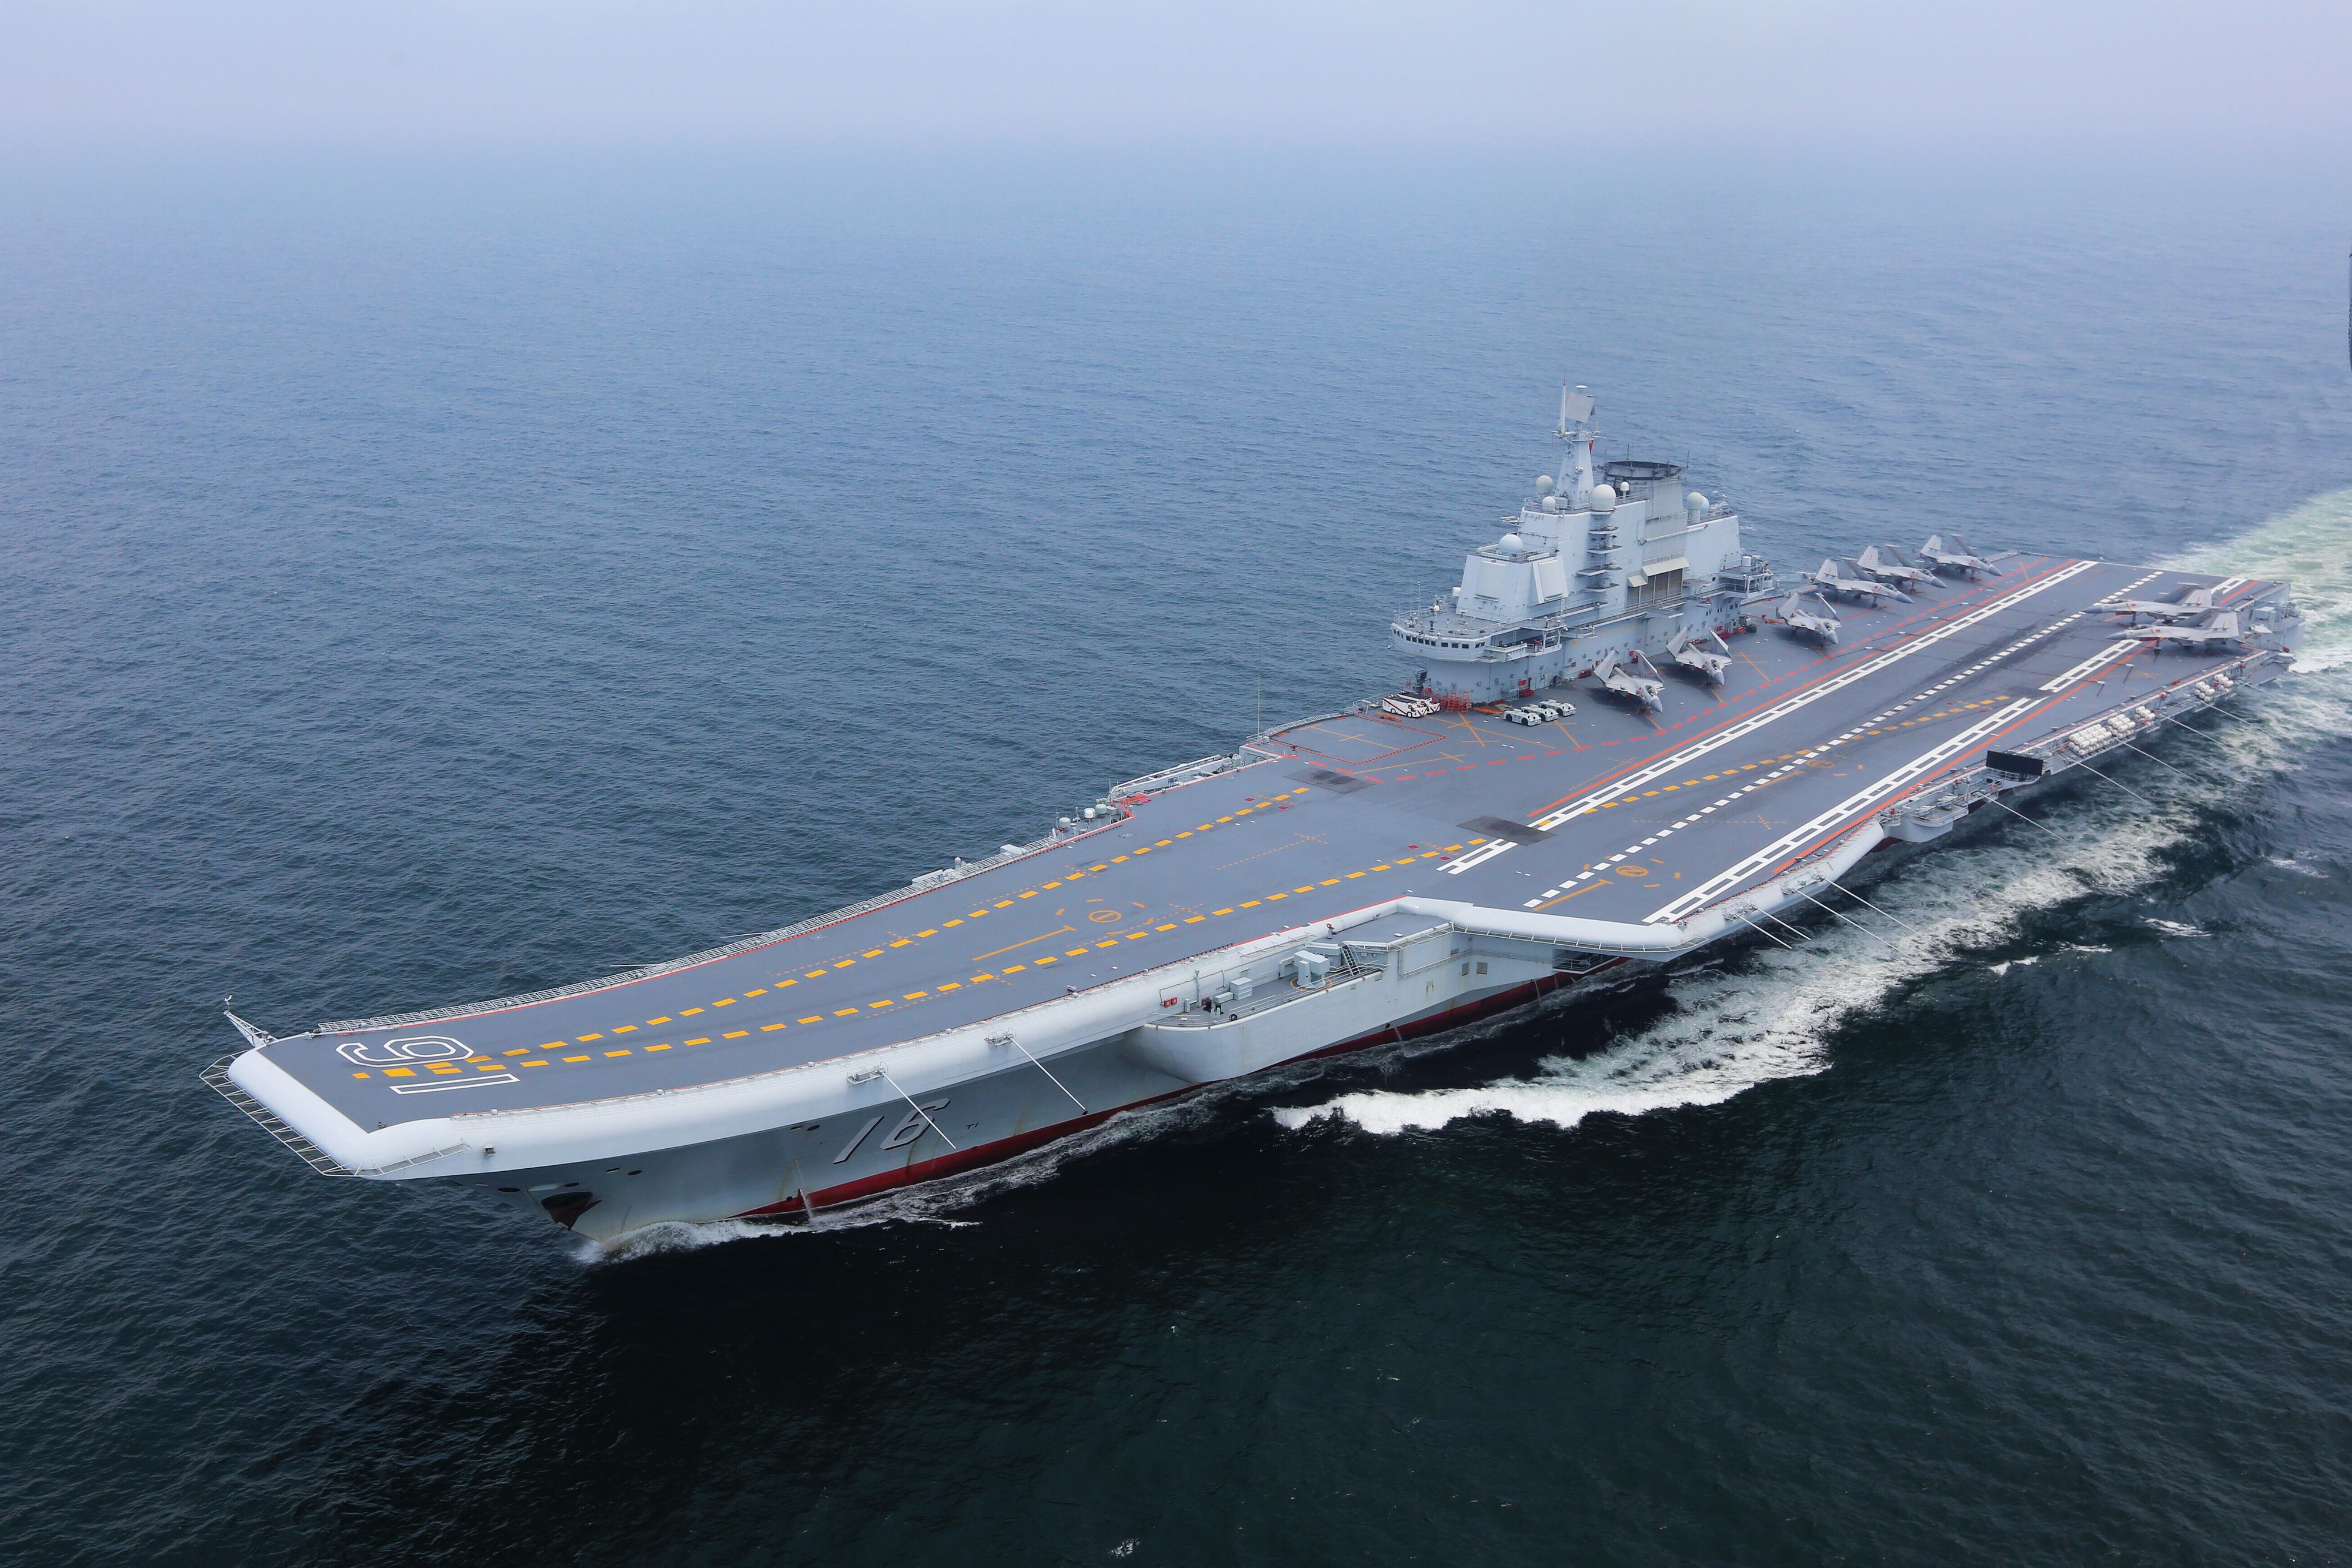 General 4000x2667 People's Liberation Army Navy Type 001 aircraft carrier military vehicle water military aircraft ripples aircraft carrier top view sea